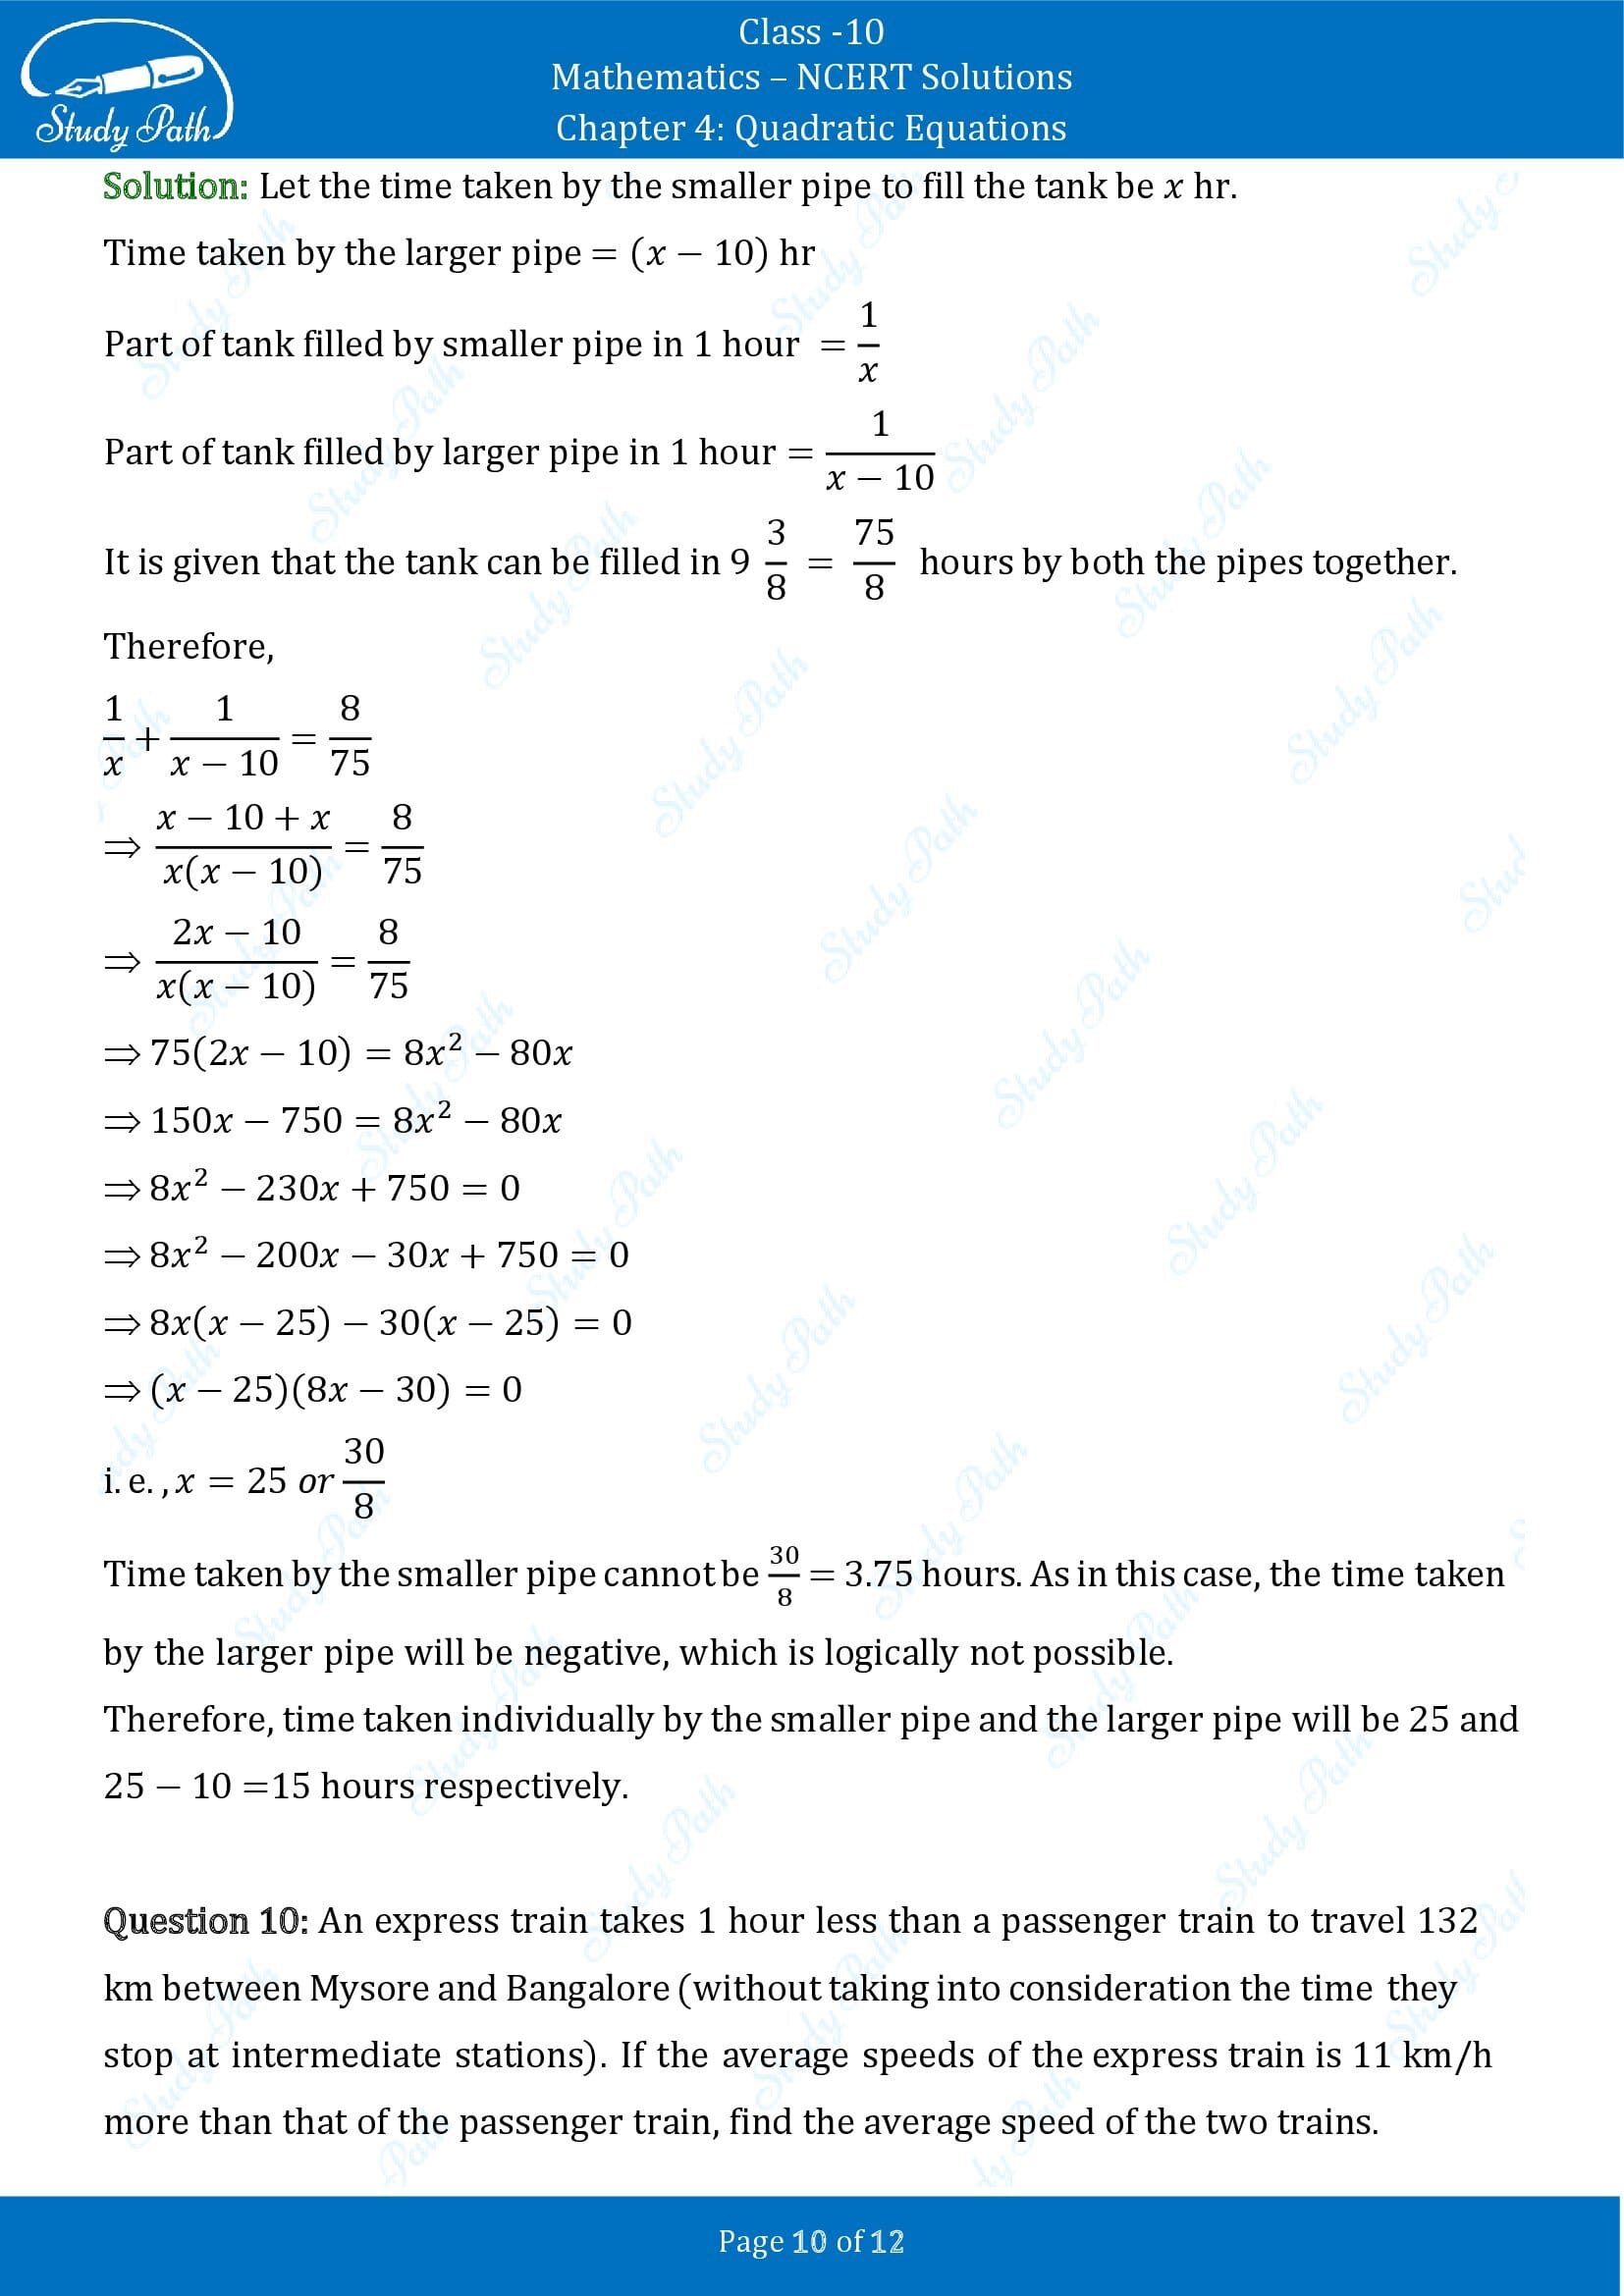 NCERT Solutions for Class 10 Maths Chapter 4 Quadratic Equations Exercise 4.3 0010